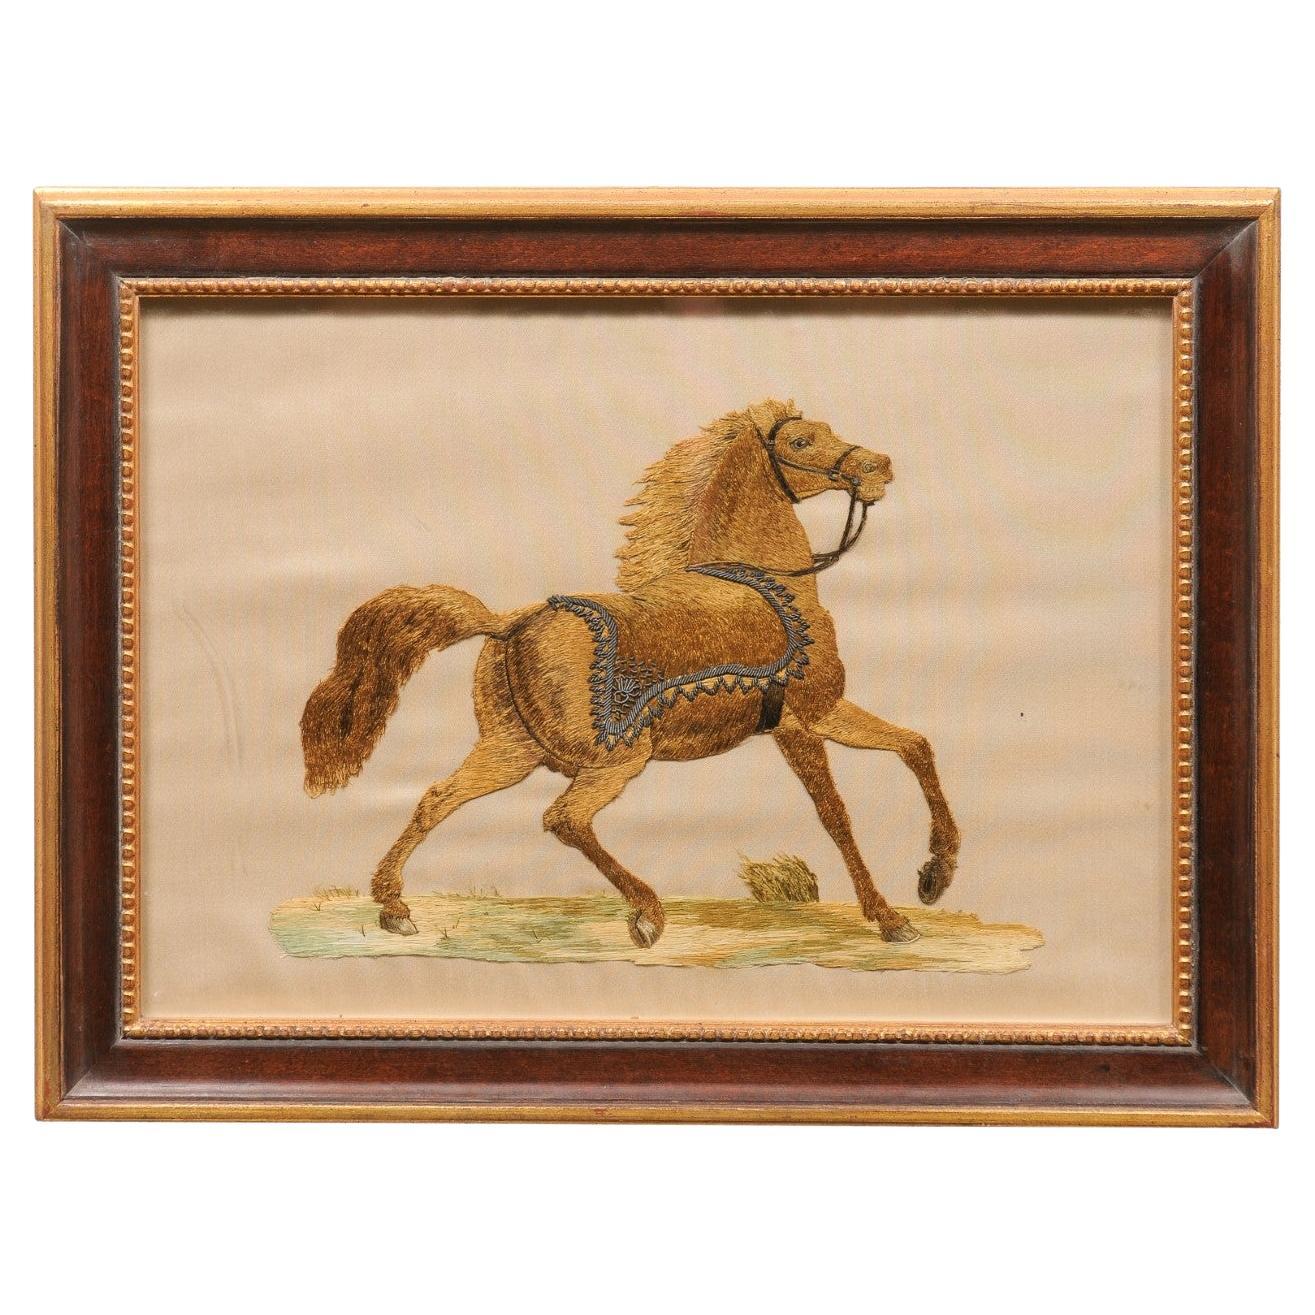 Framed 19th Century Silk Embroidery of Horse For Sale